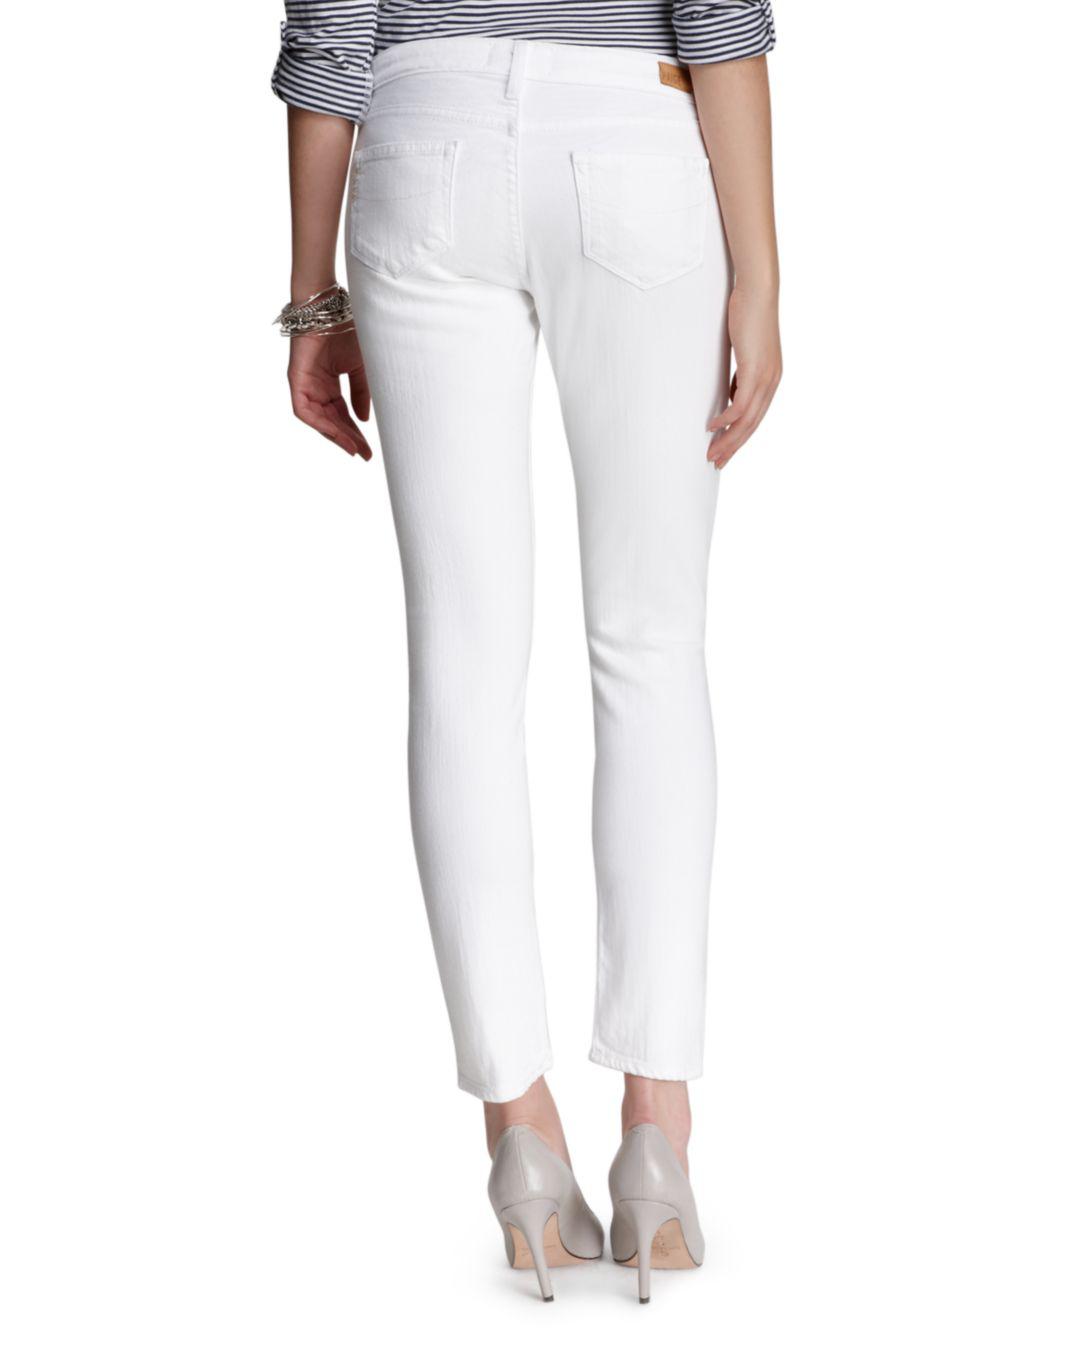 PAIGE Denim Jeans - Skyline Ankle Peg In Optic White - Lyst